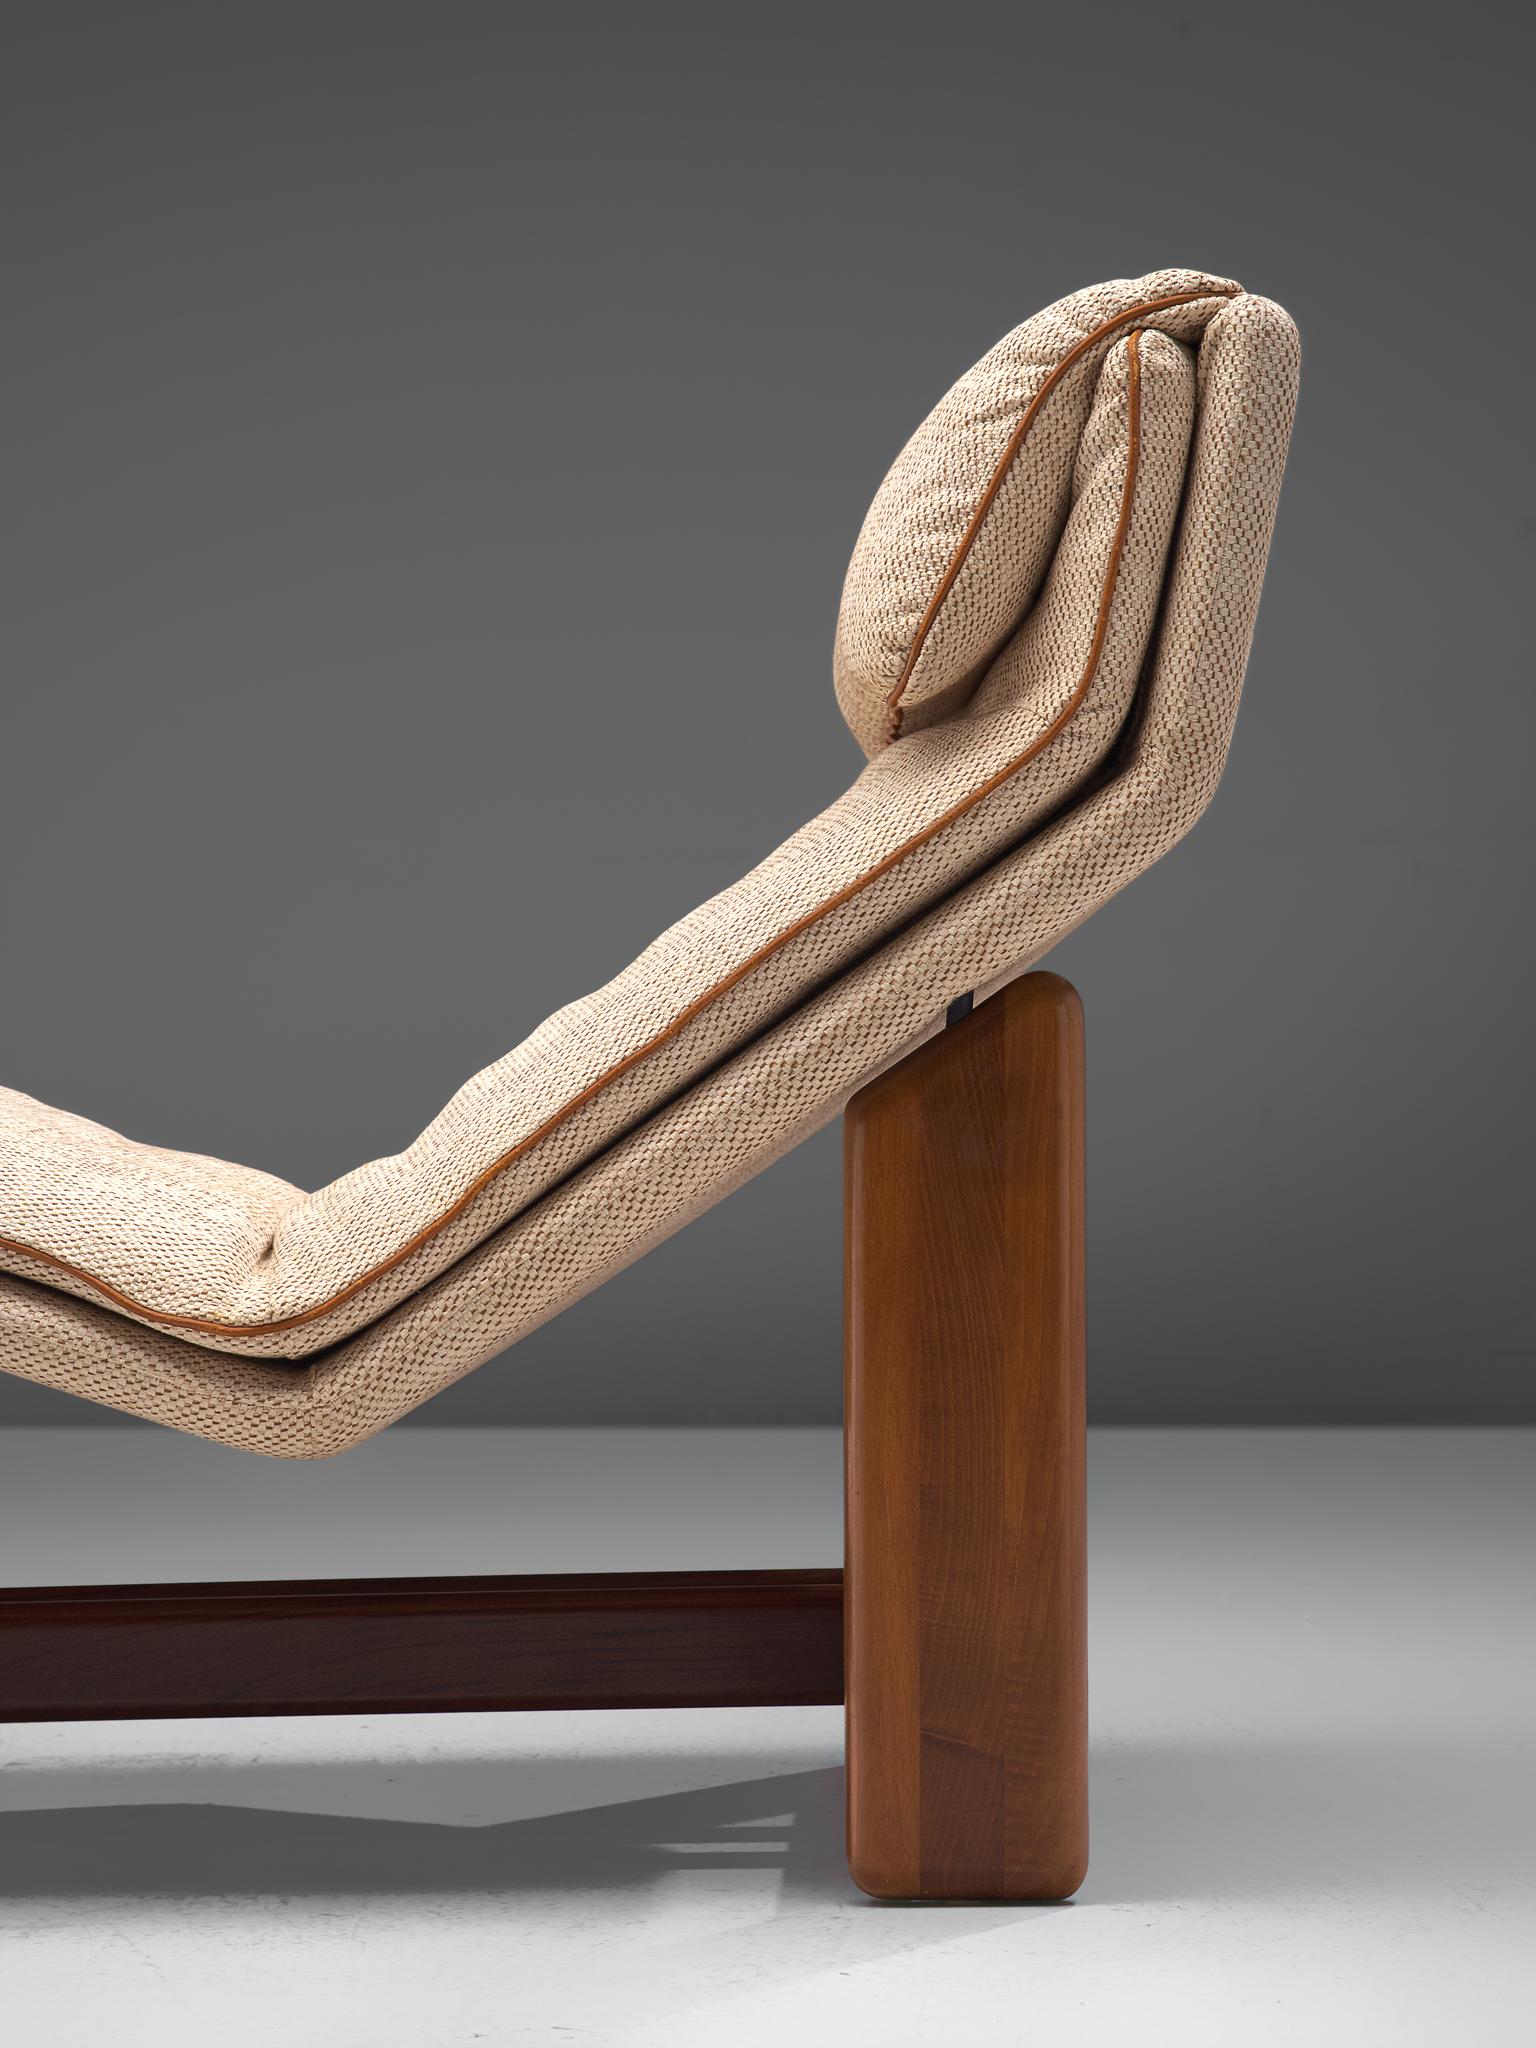 Leather Italian Chaise Longue in Beige Fabric and Walnut by Mobil Girgi